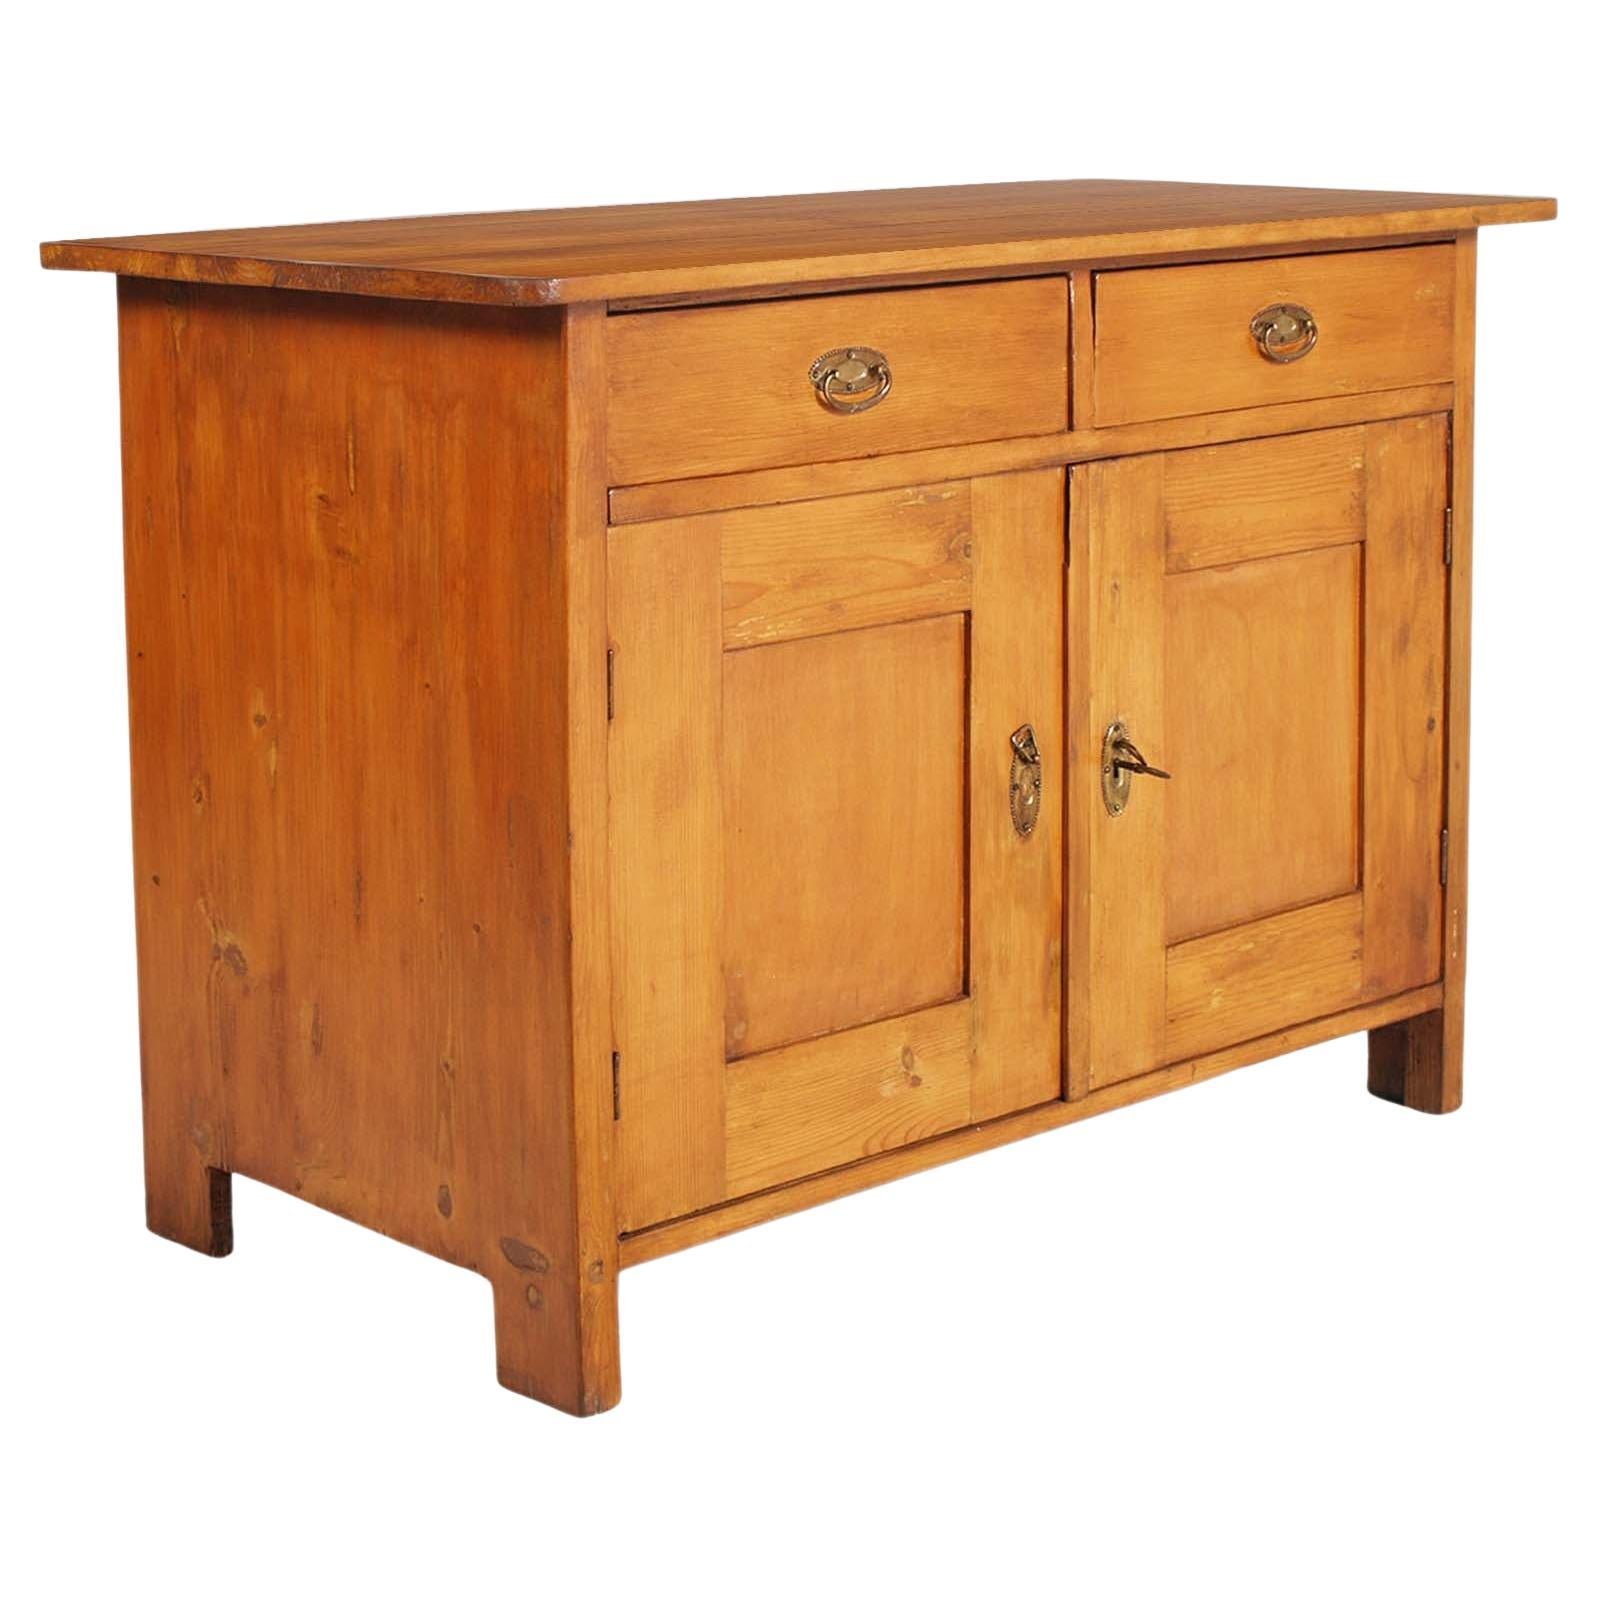 Tyrolean Late 18th Century Credenza Sideboard Massive Chestnut Wood Wax Polished